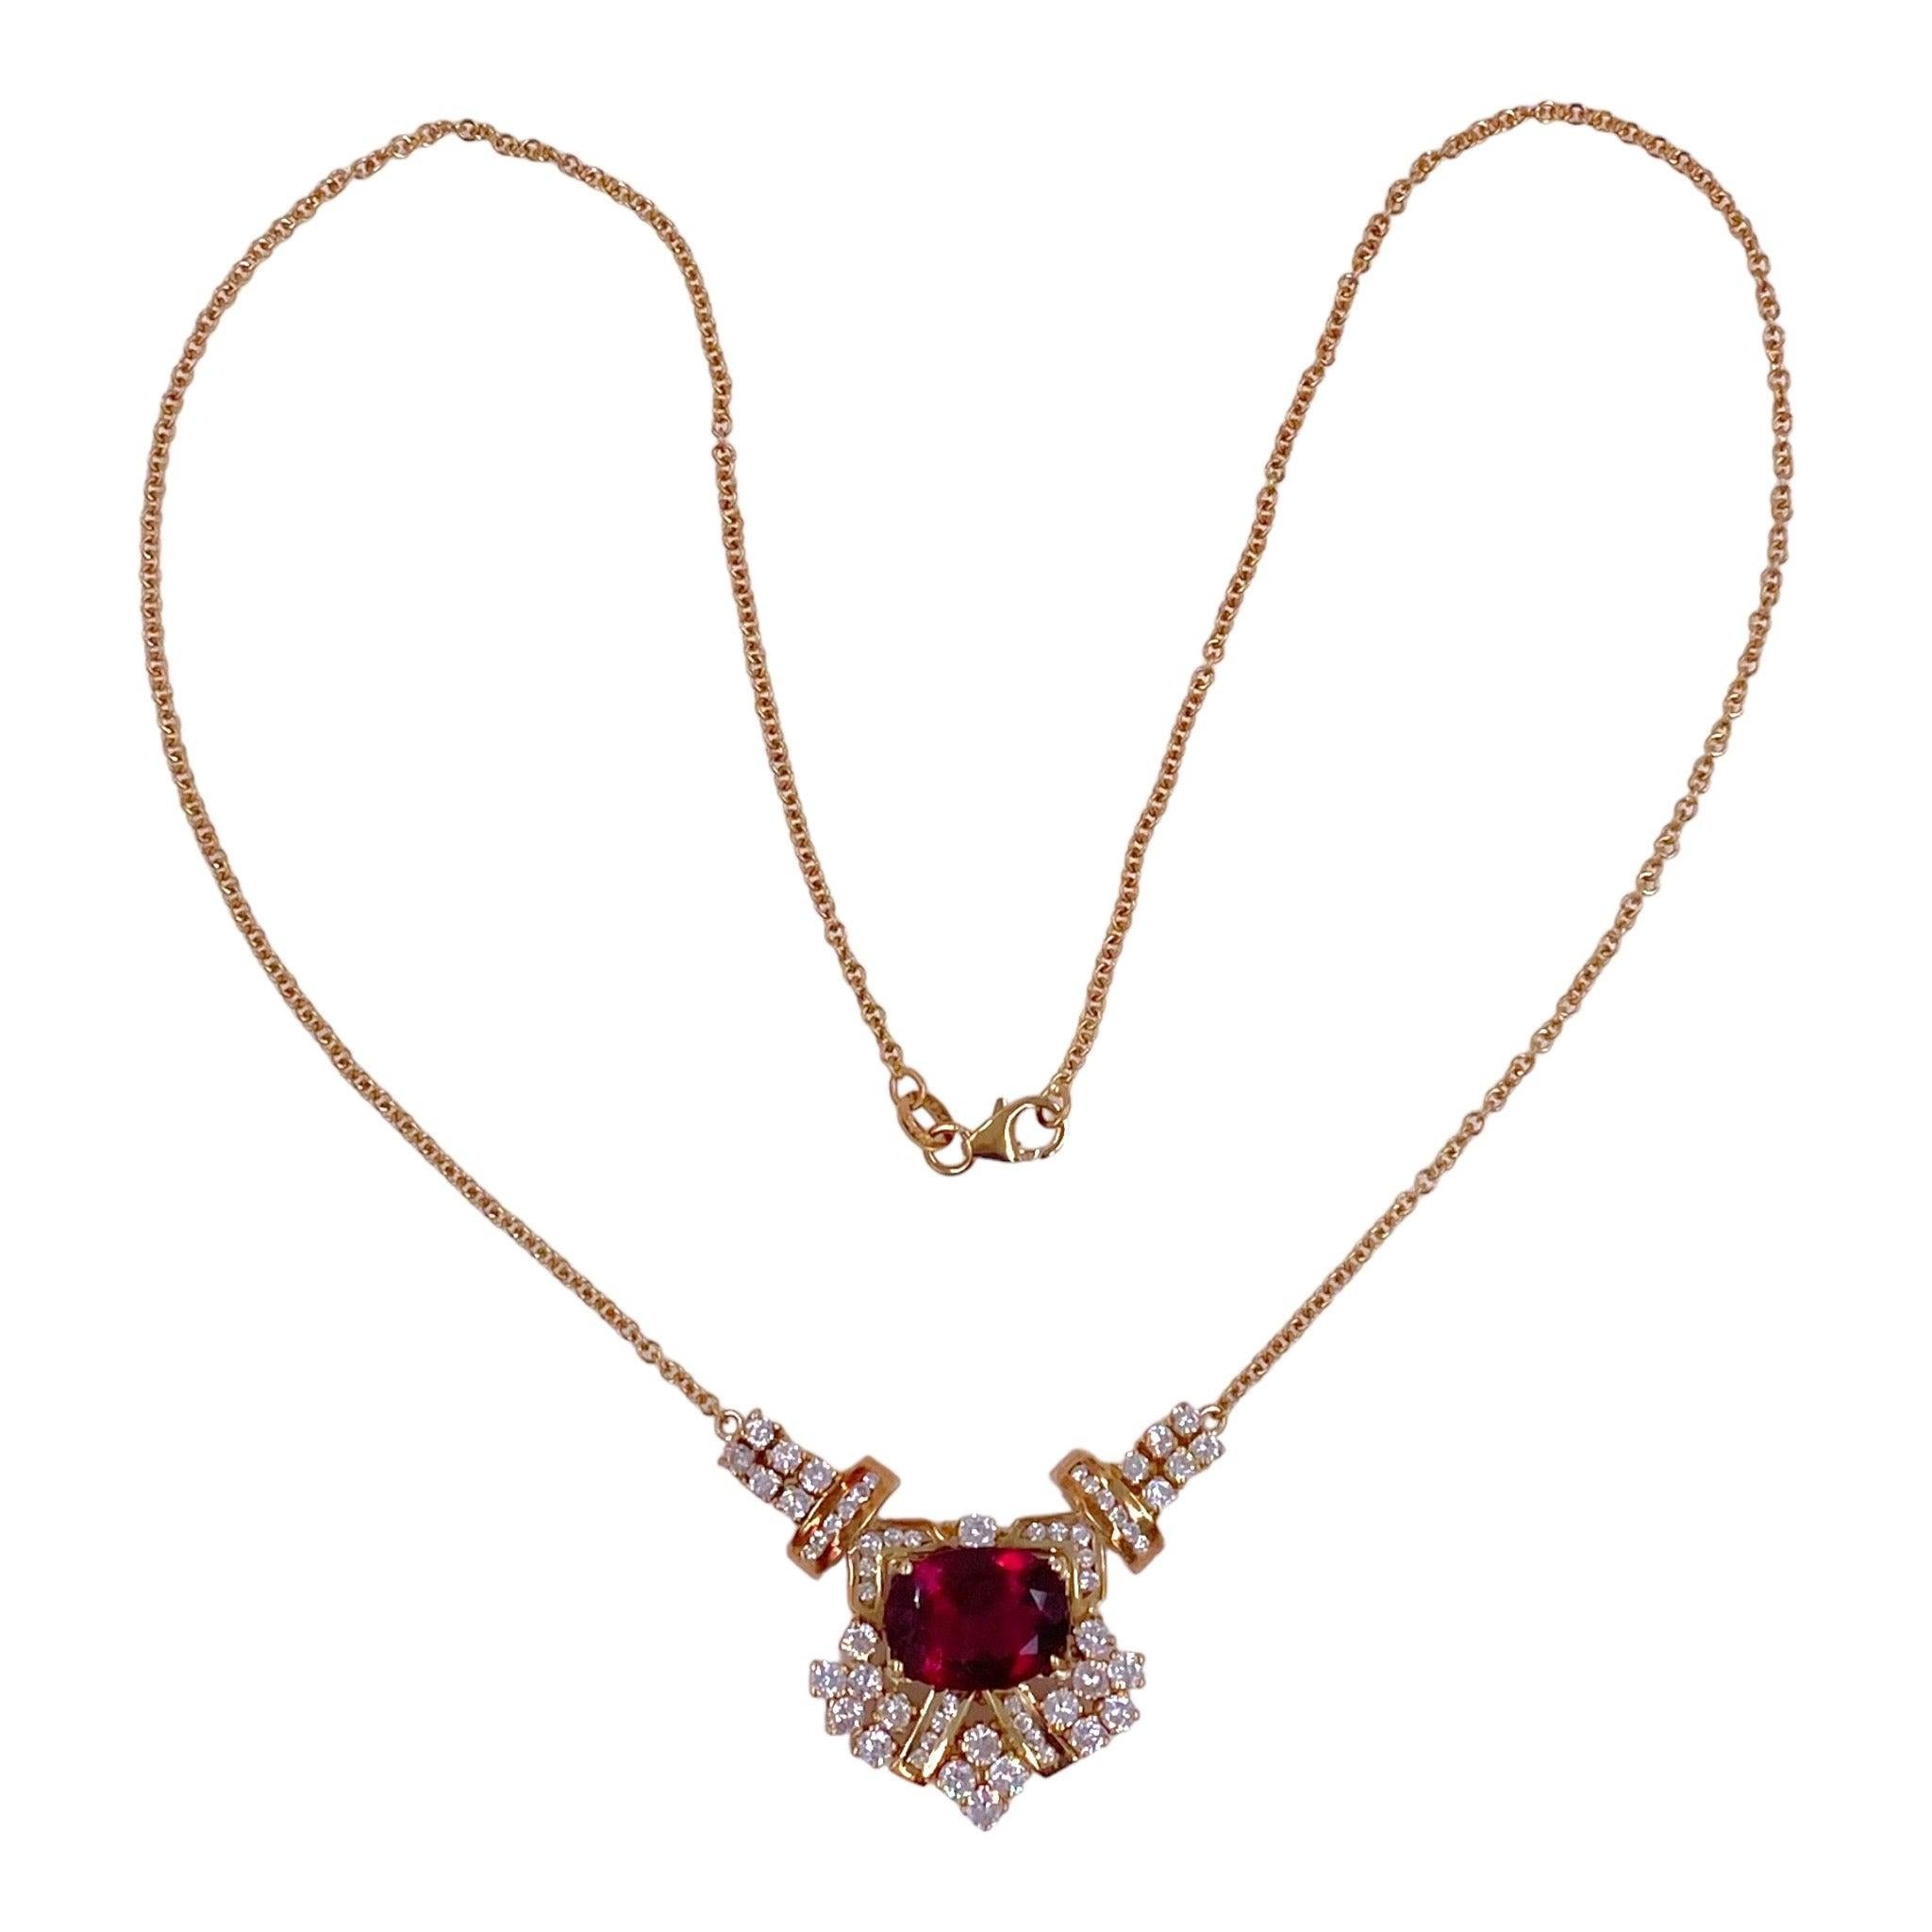 Crafted in 18K yellow gold, the necklace features an oval rubellite tourmaline set within an intricate diamond cluster setting.
Rubellite: 5.0 carats
59 round brilliant cut diamonds: 1.75ctw. Color: G-H, Clarity: VS2-SI2
Measurements:
Front: 31 mm L